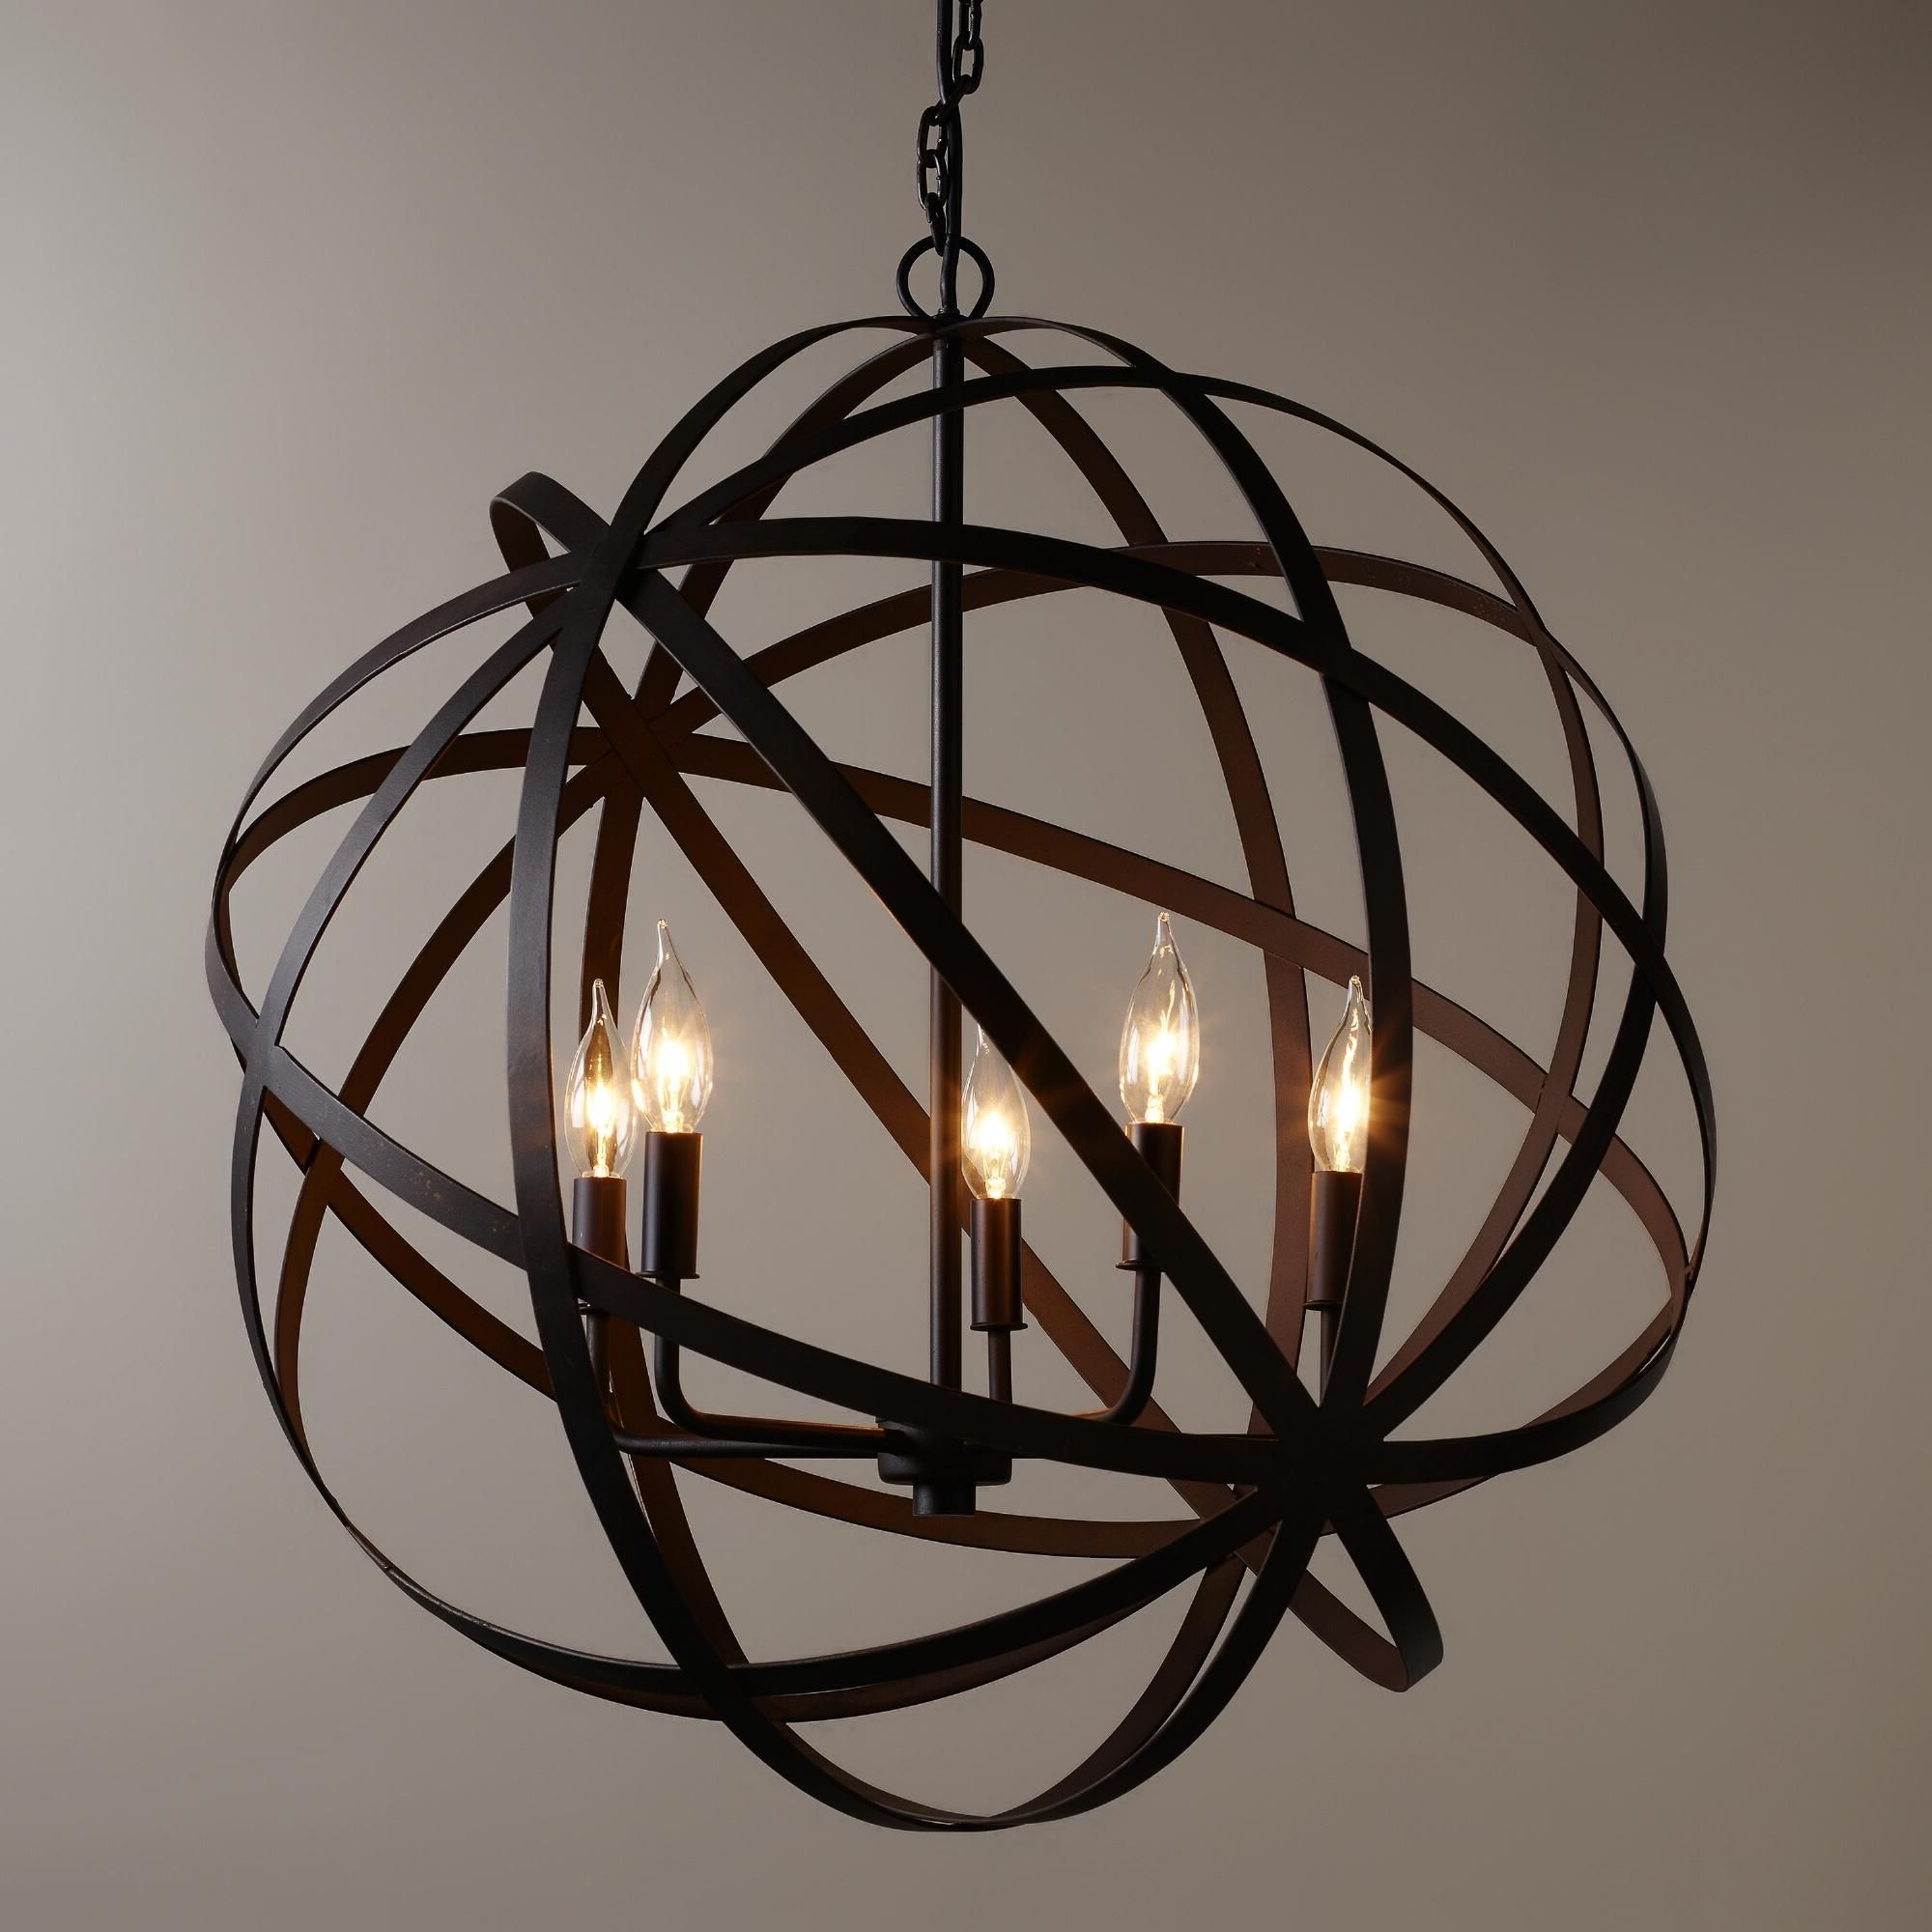 Most Recently Released Orb Chandeliers Within Light : Creative Orb Chandelier About Interior Designing Home Ideas (View 1 of 20)